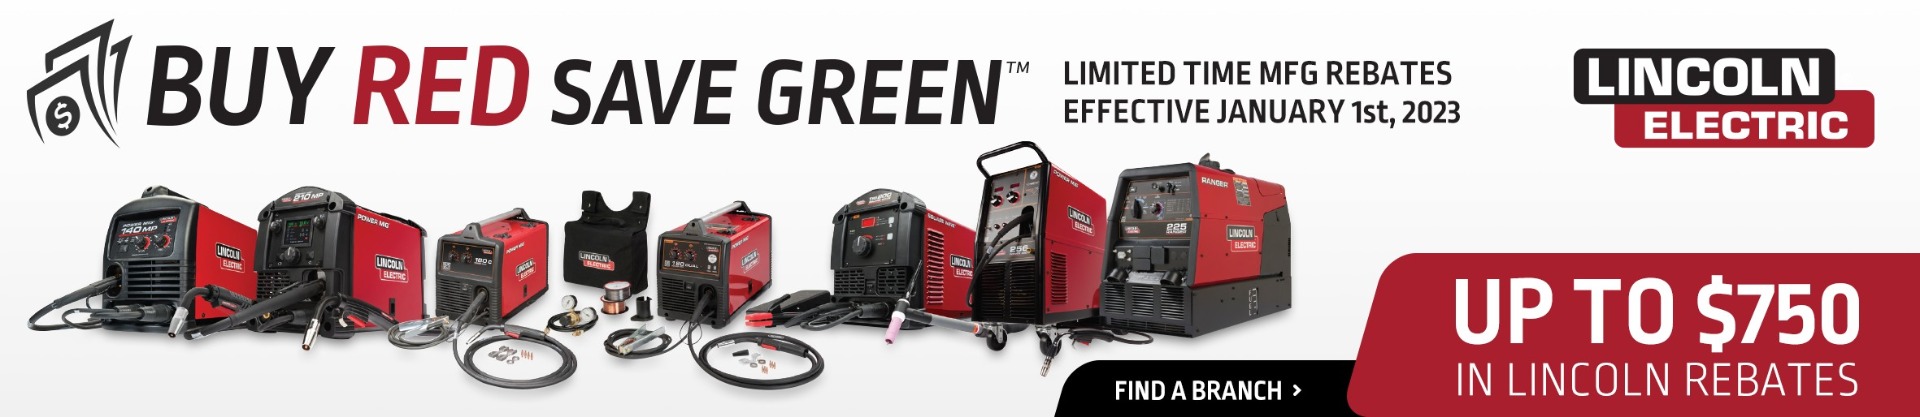 Lincoln Buy Red, Save Green Promotion